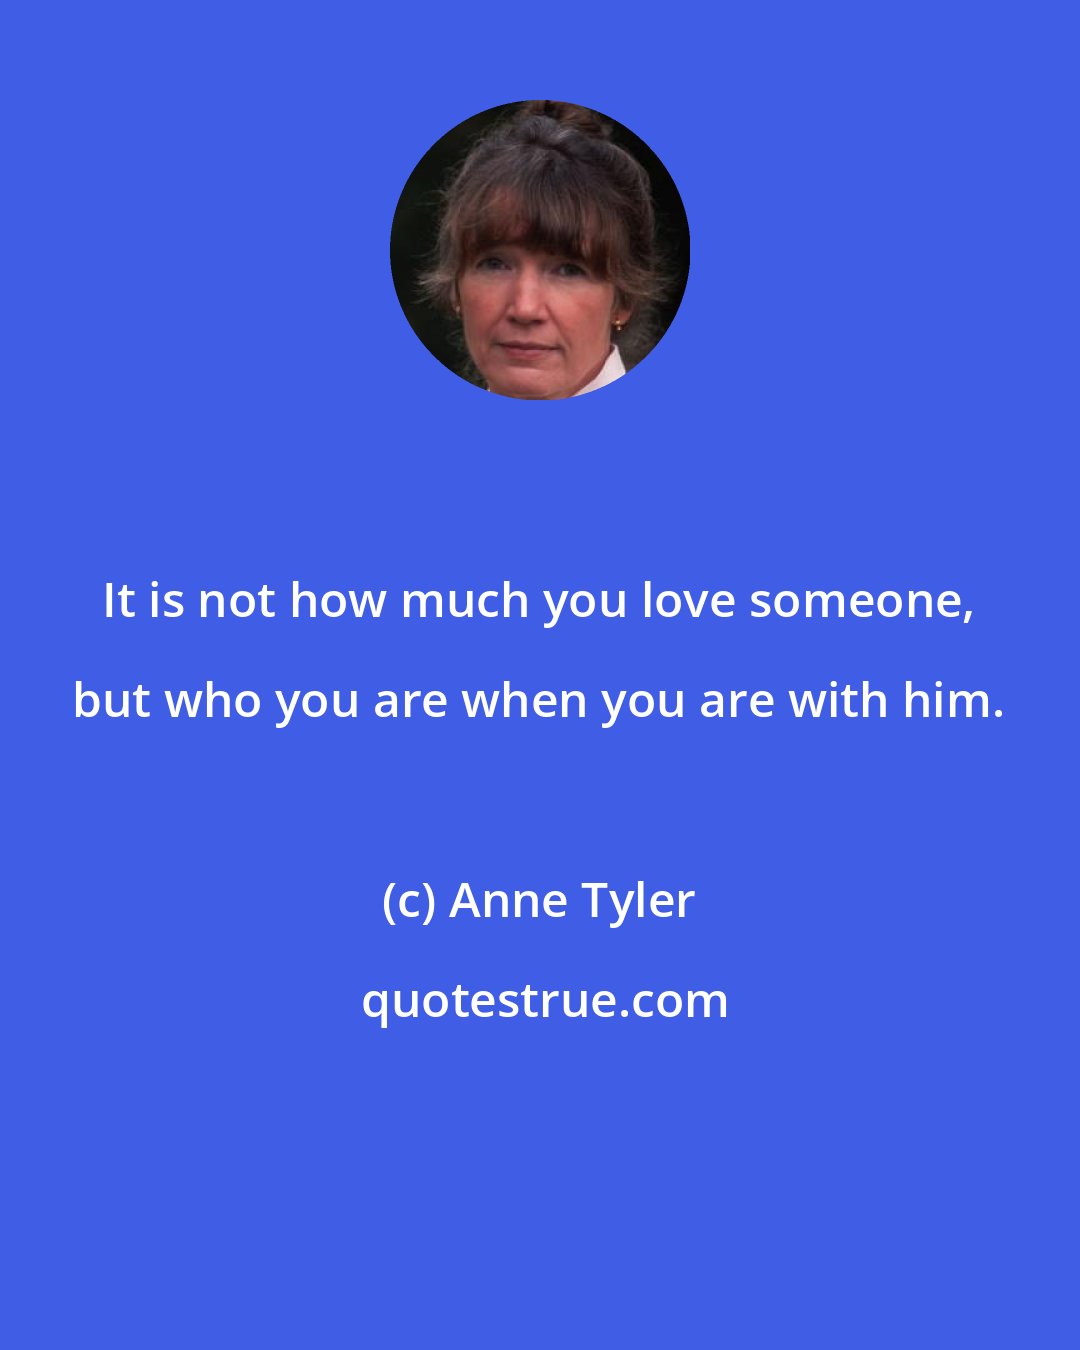 Anne Tyler: It is not how much you love someone, but who you are when you are with him.